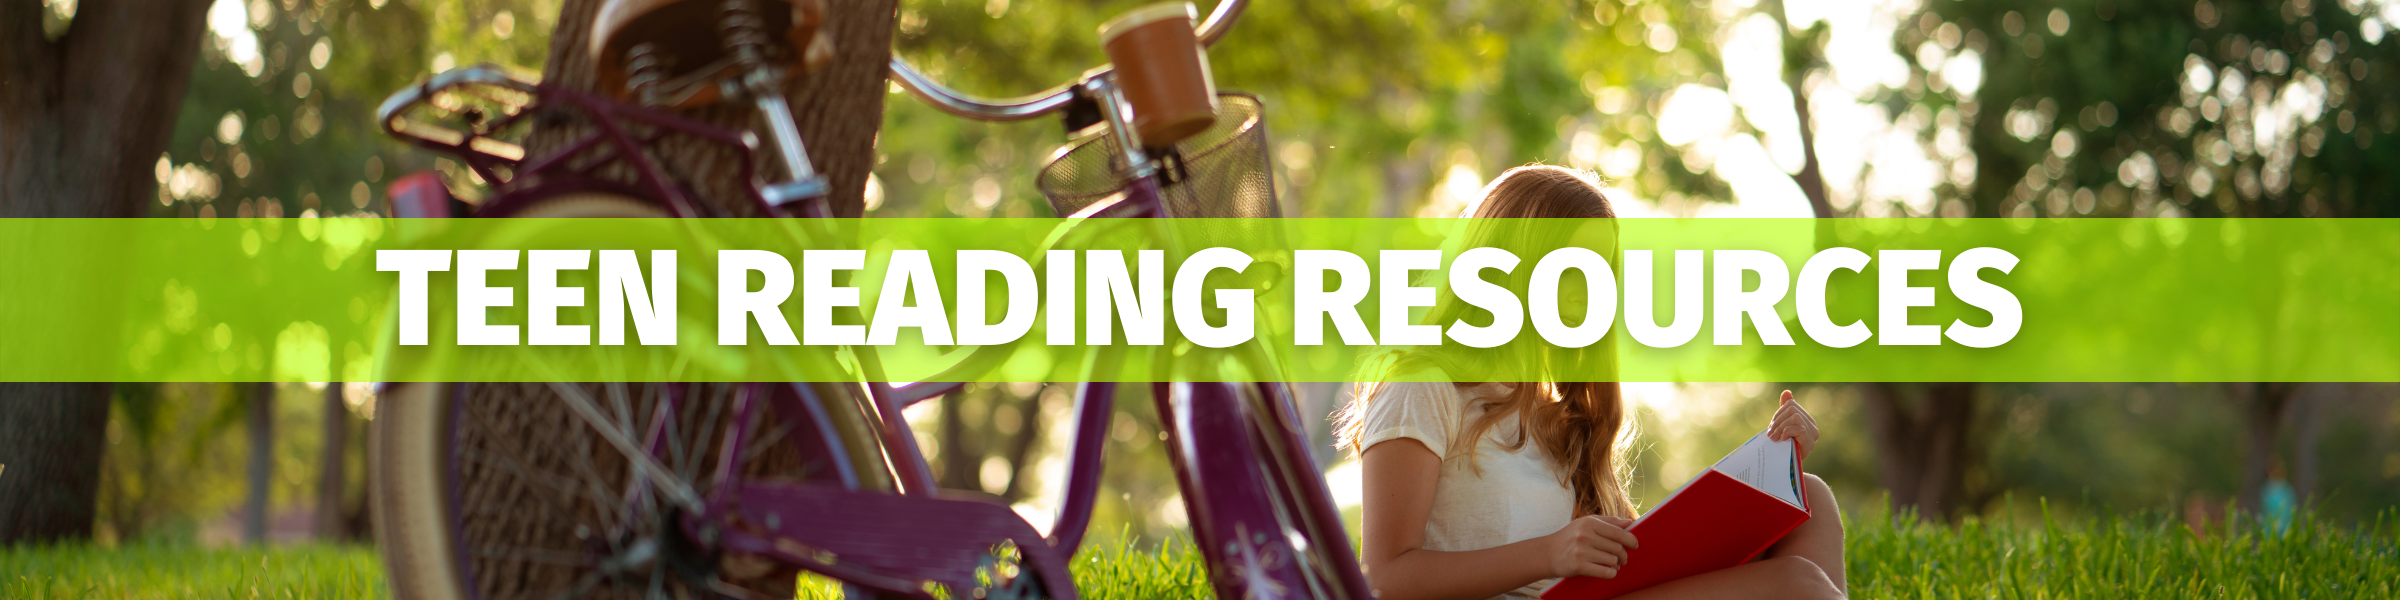 Teen Reading Resources